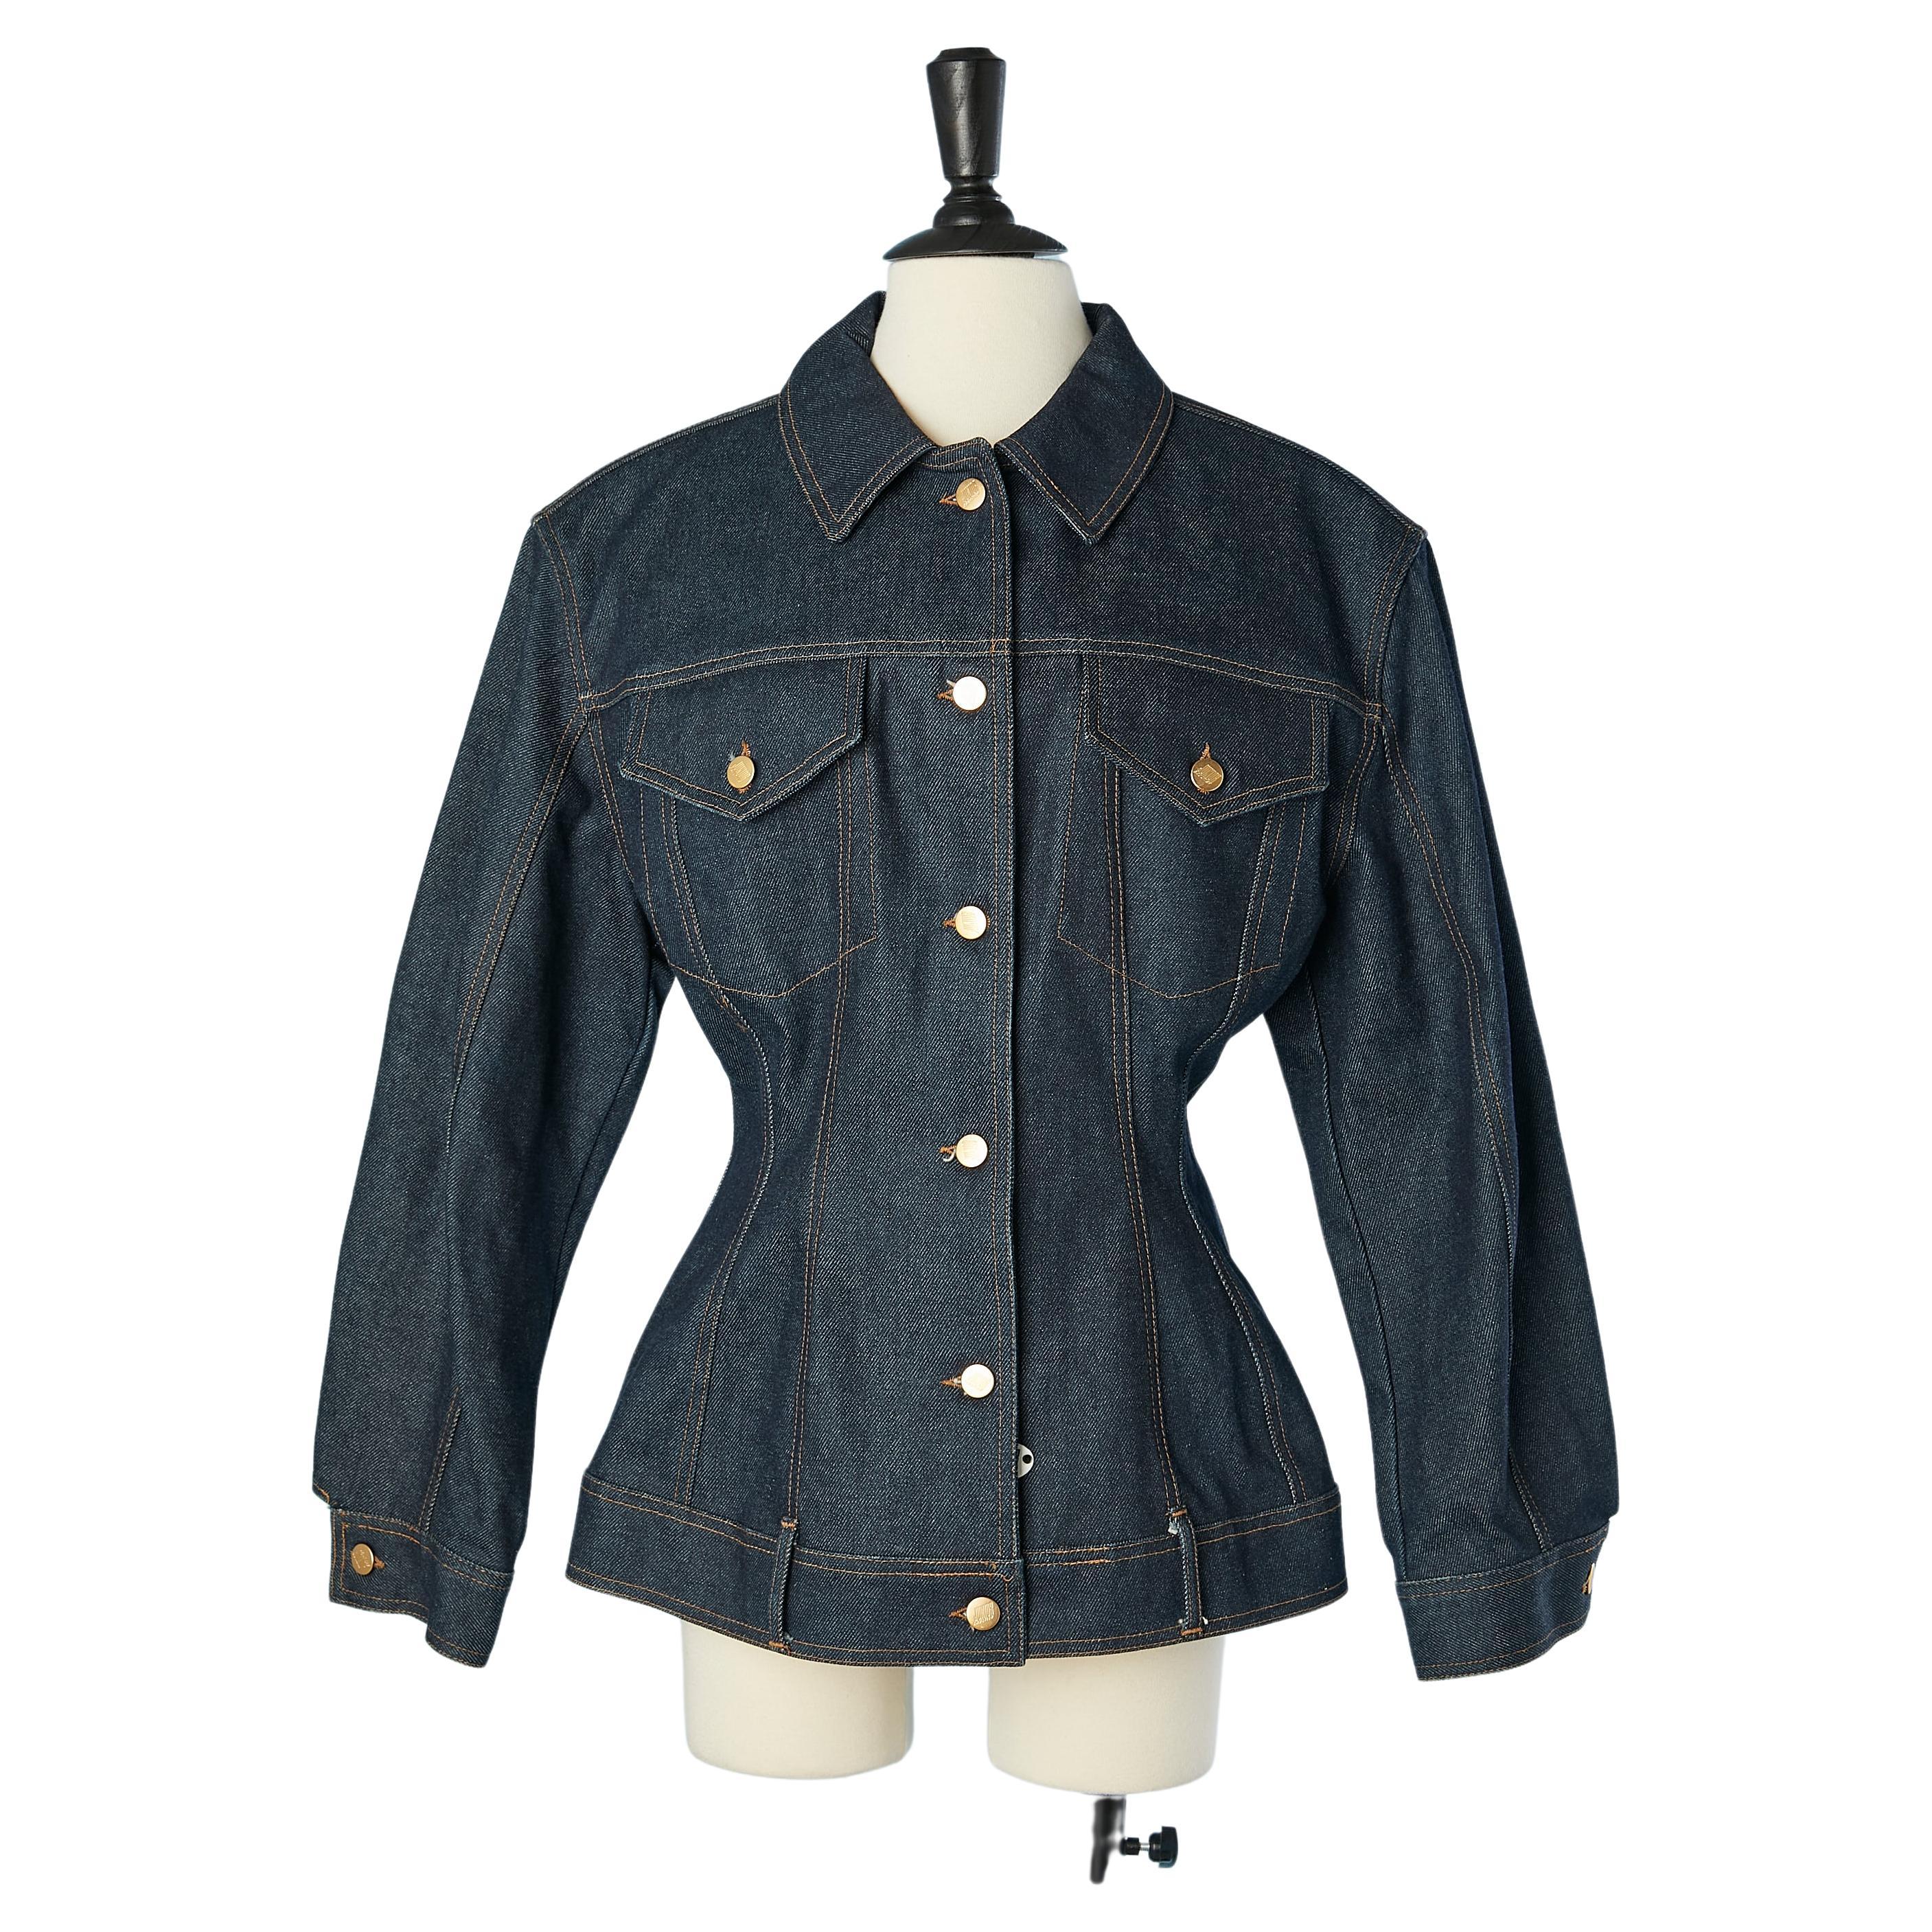 Denim jacket with fitted waist and curved hips Junior Gaultier 